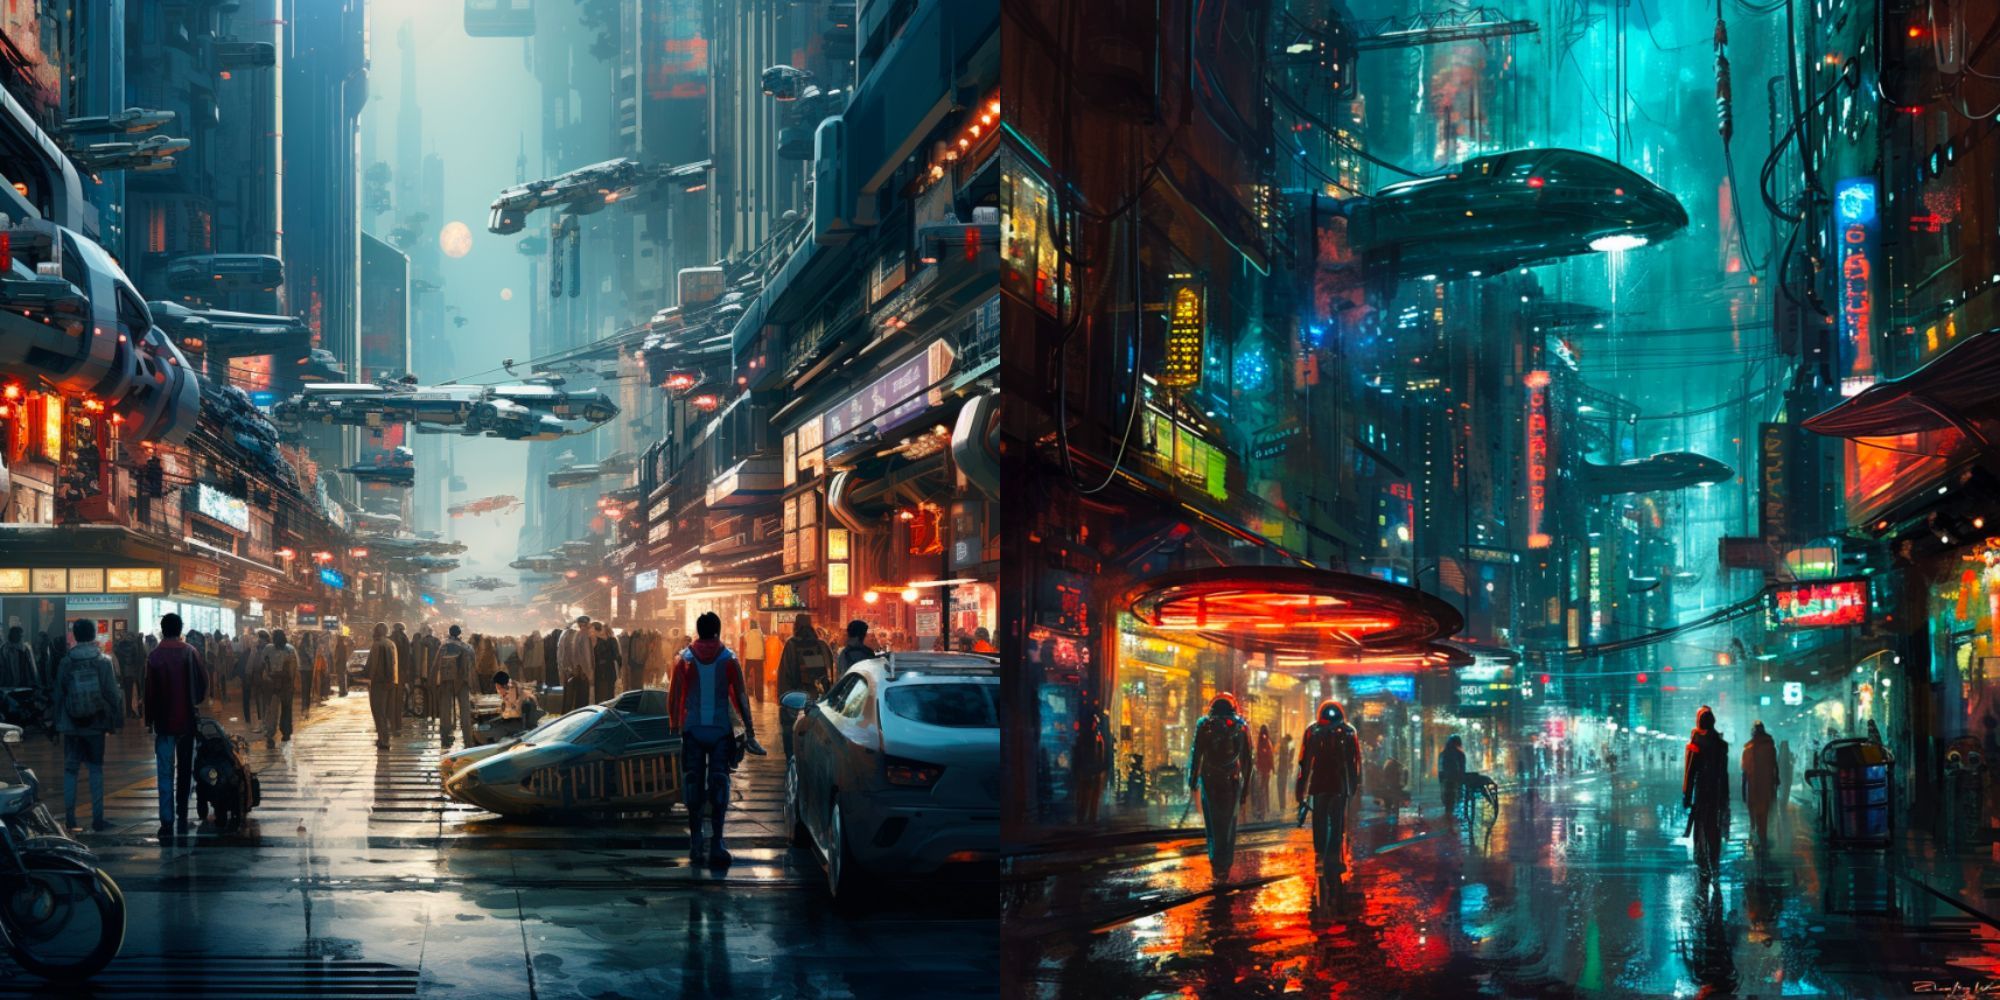 Two side-by-side images of a futuristic street scene with aliens, robots, and humans all living in the same city. 